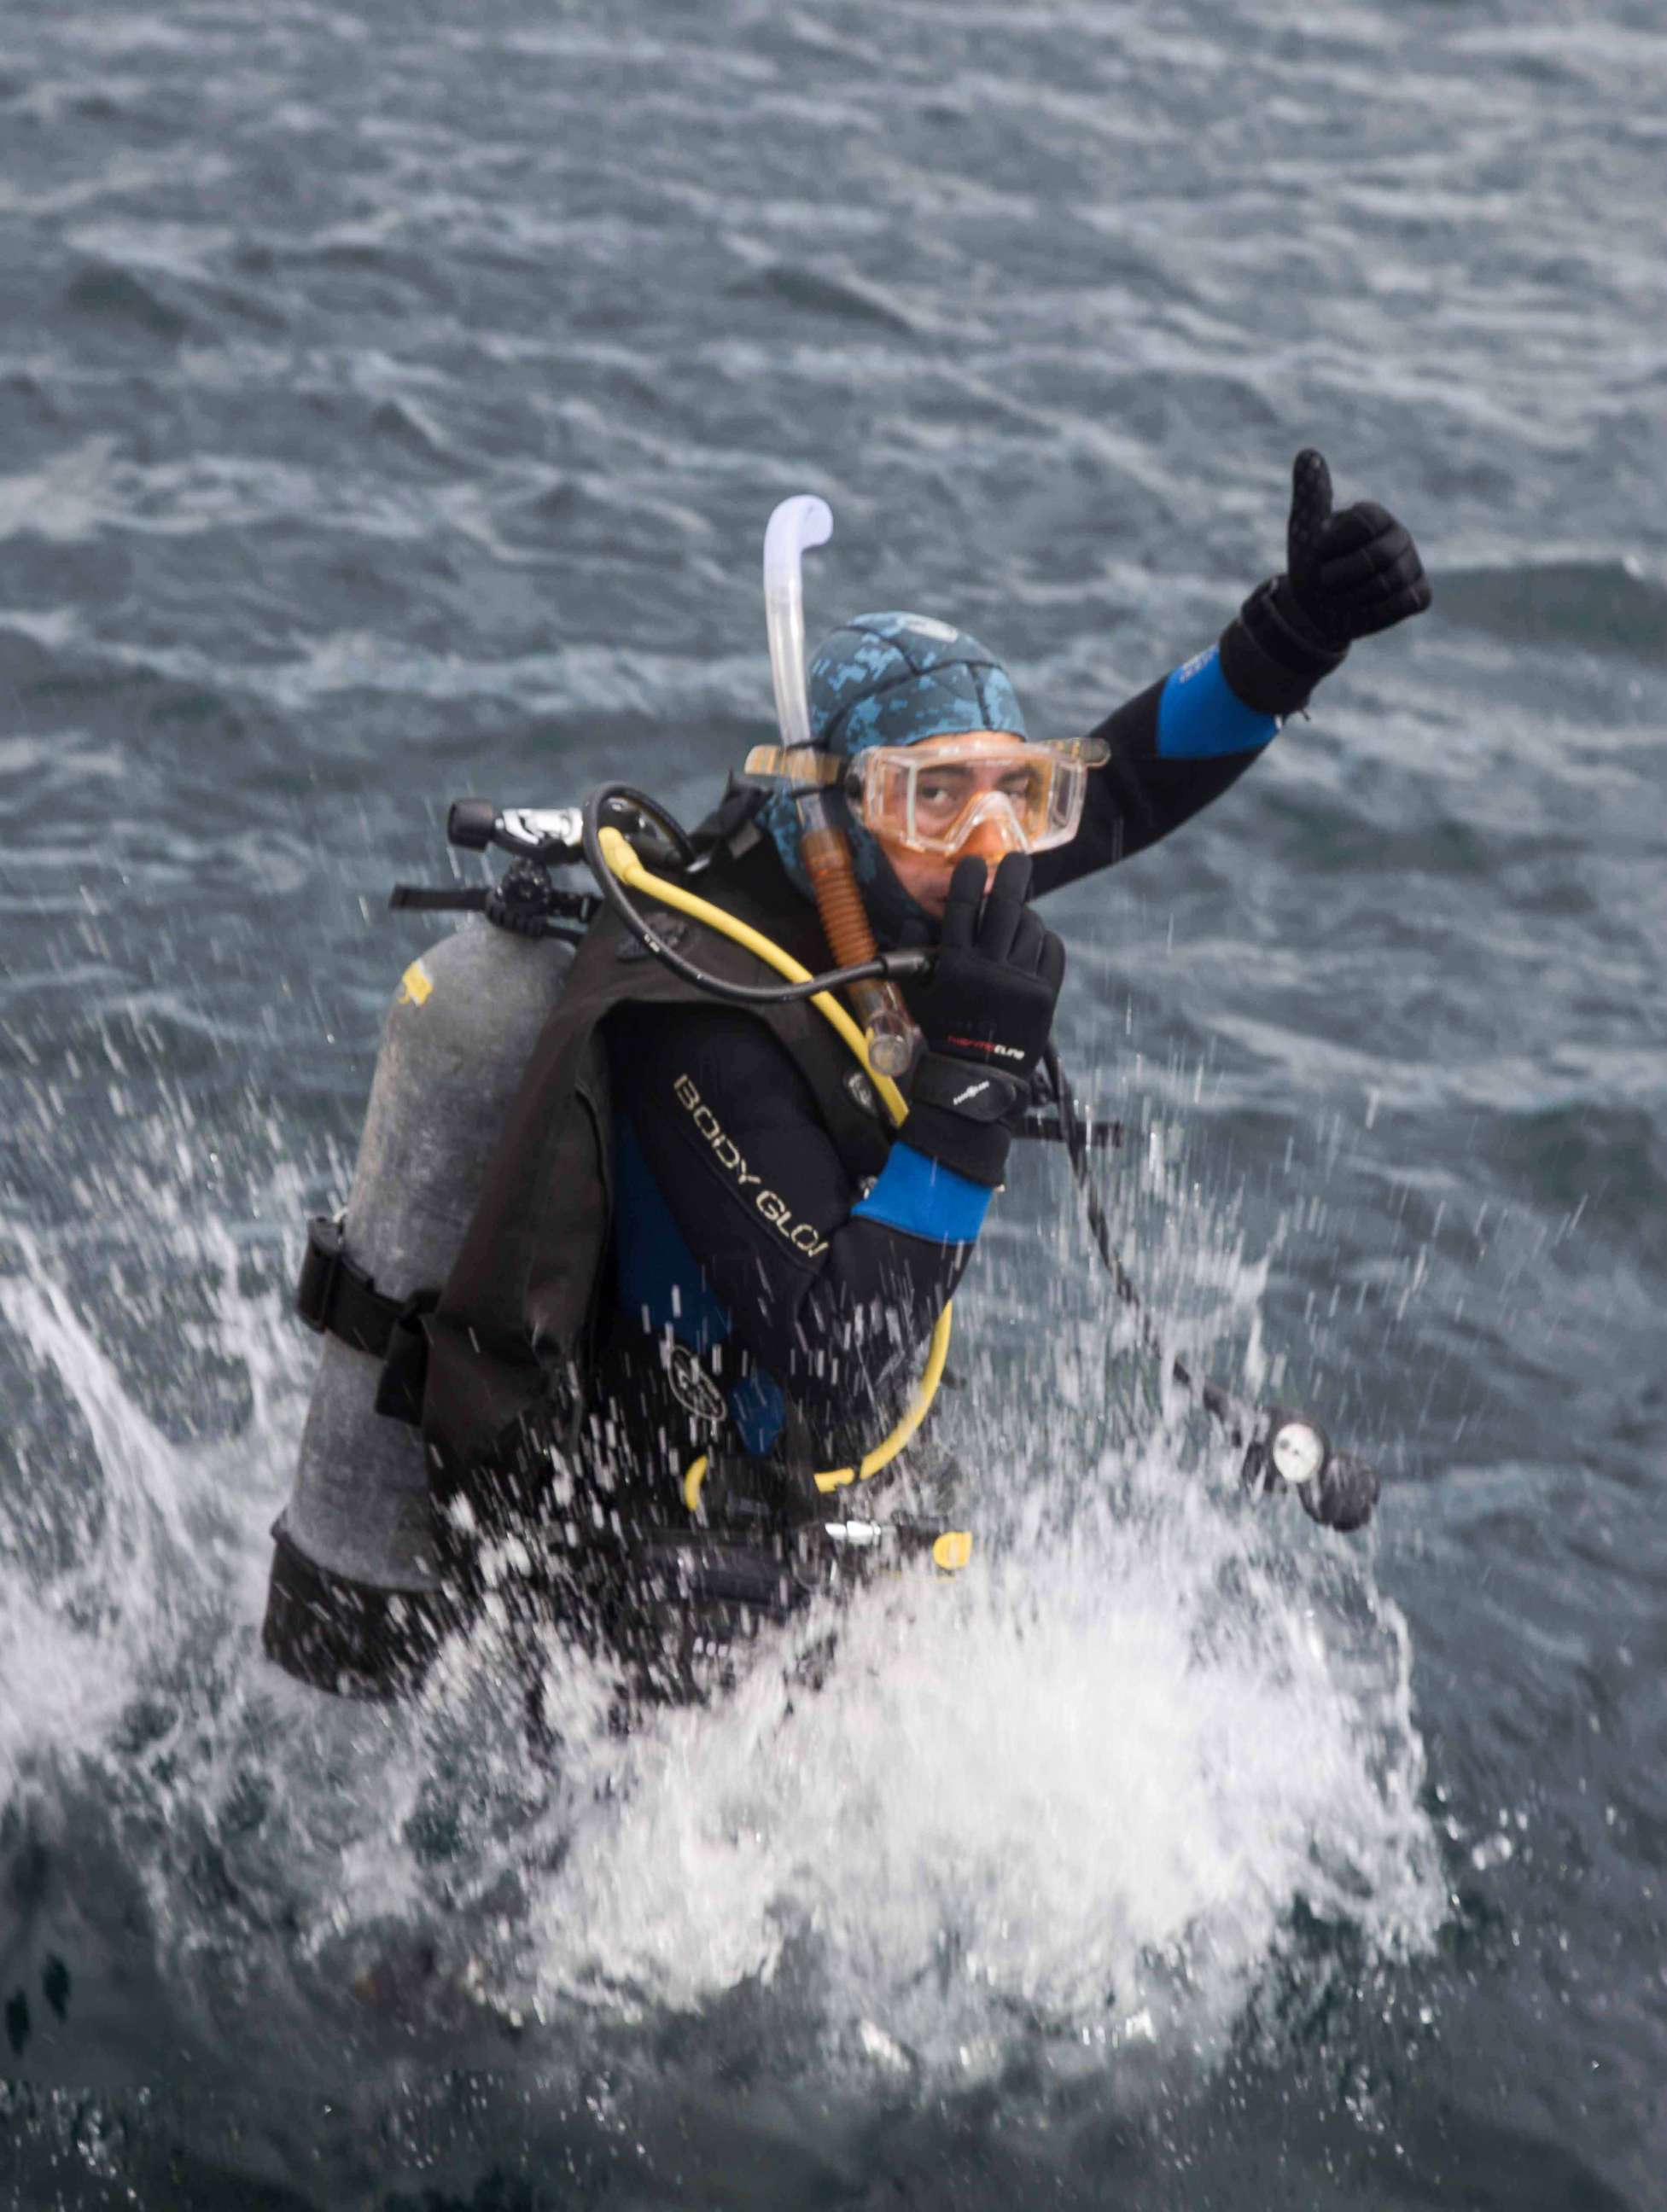 PHOTO: A Dive Warrior participant gives a thumbs up while jumping in the water off the California coast.